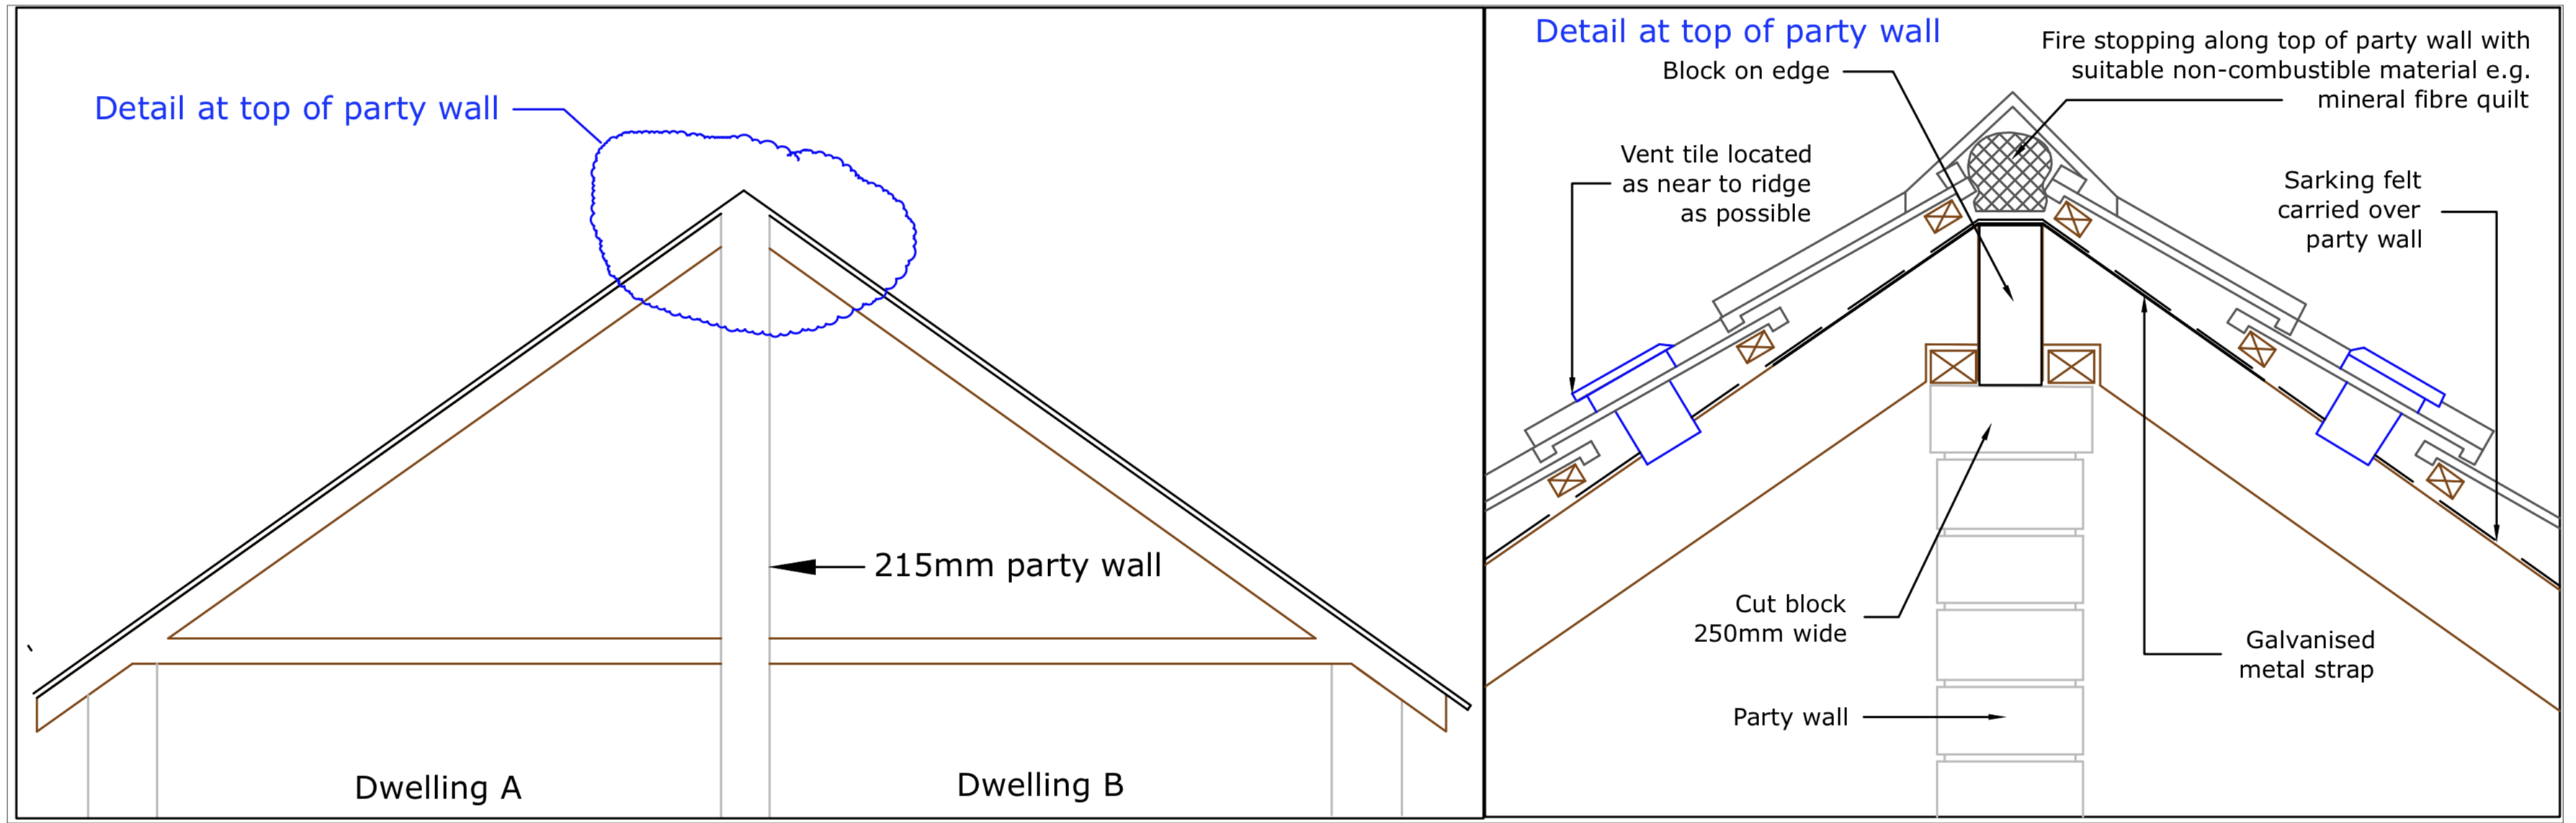 Diagram D57 - Duo pitched roof with party wall detail with fire stoppingg